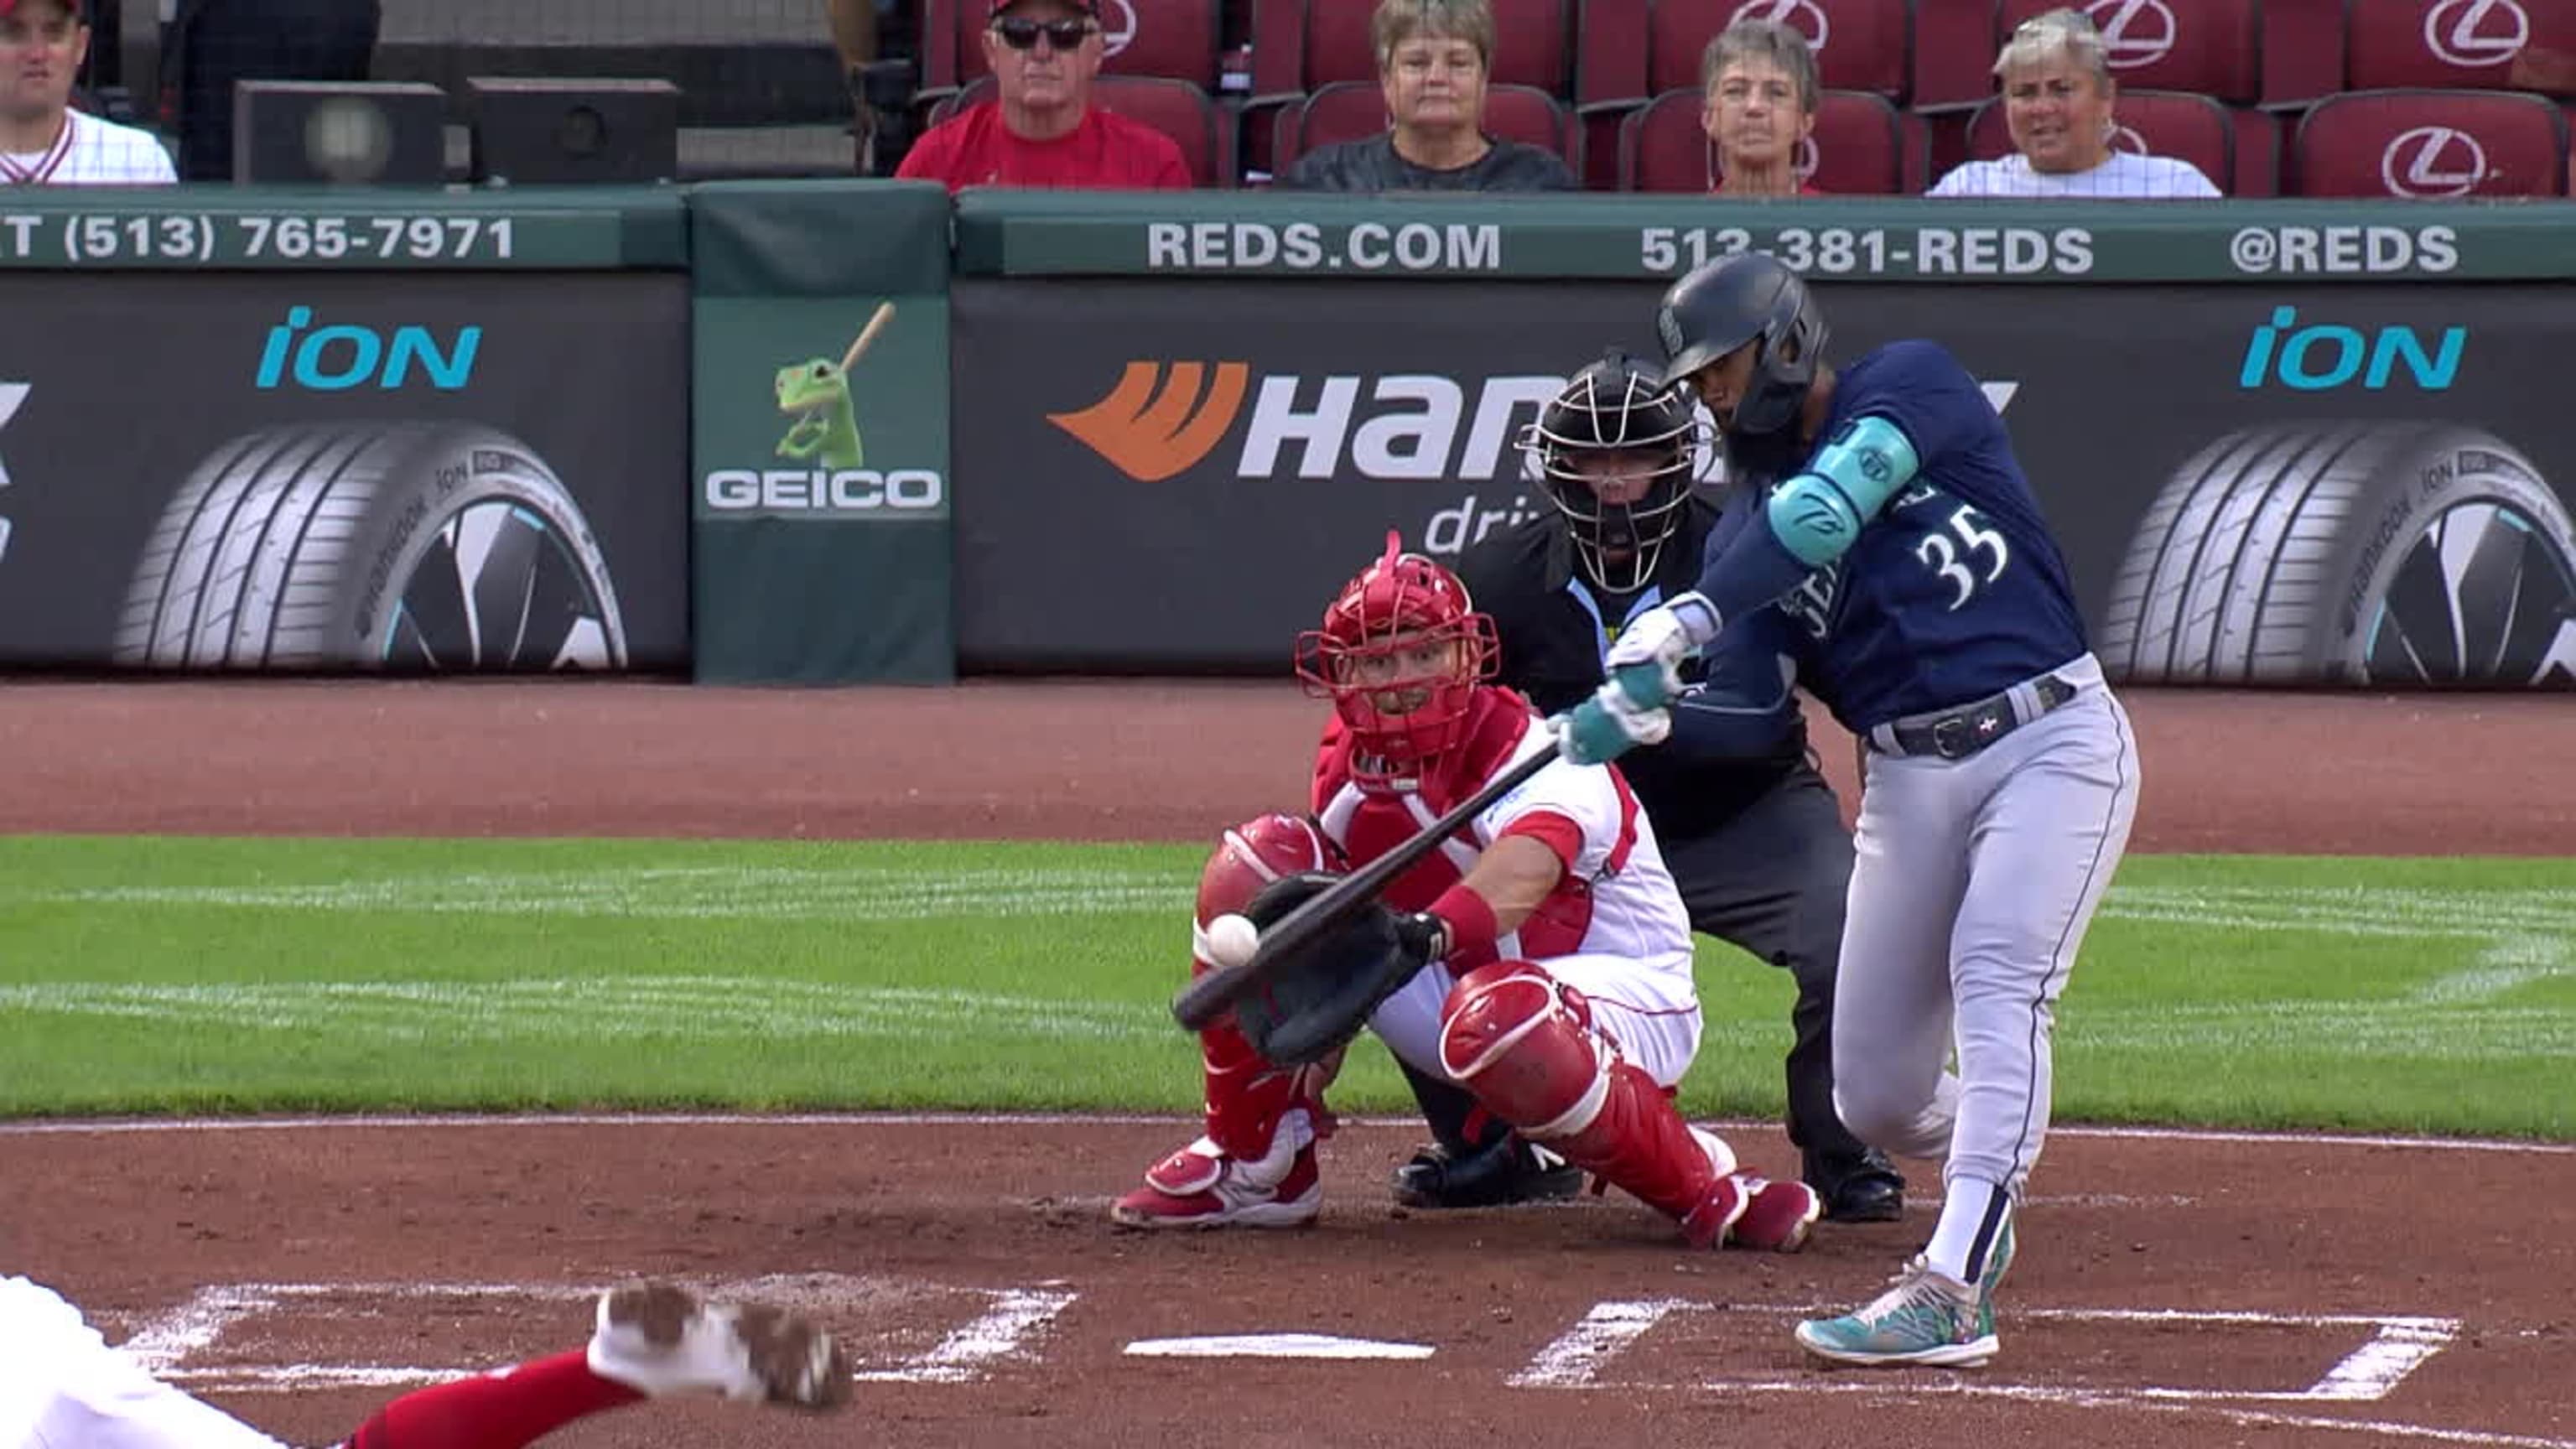 Félix shows improvement, but Mariners fall short in loss against Red Sox -  Lookout Landing